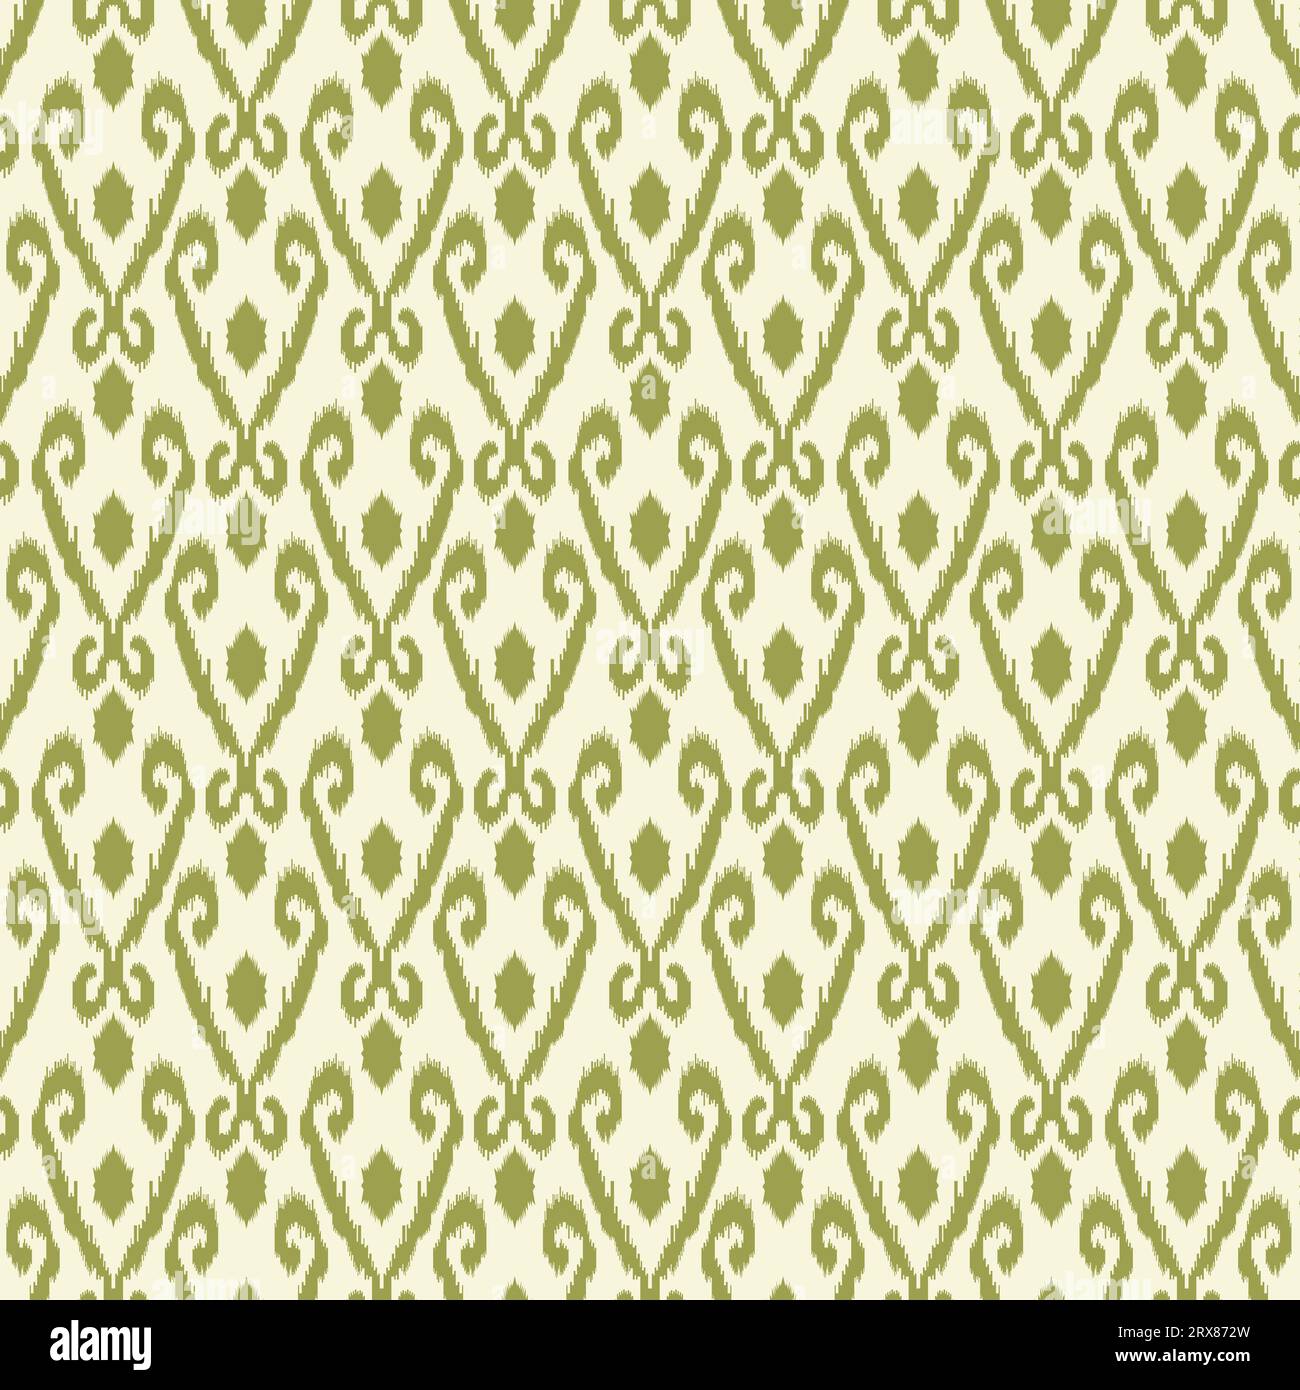 A vibrant green and white ikat pattern Stock Vector